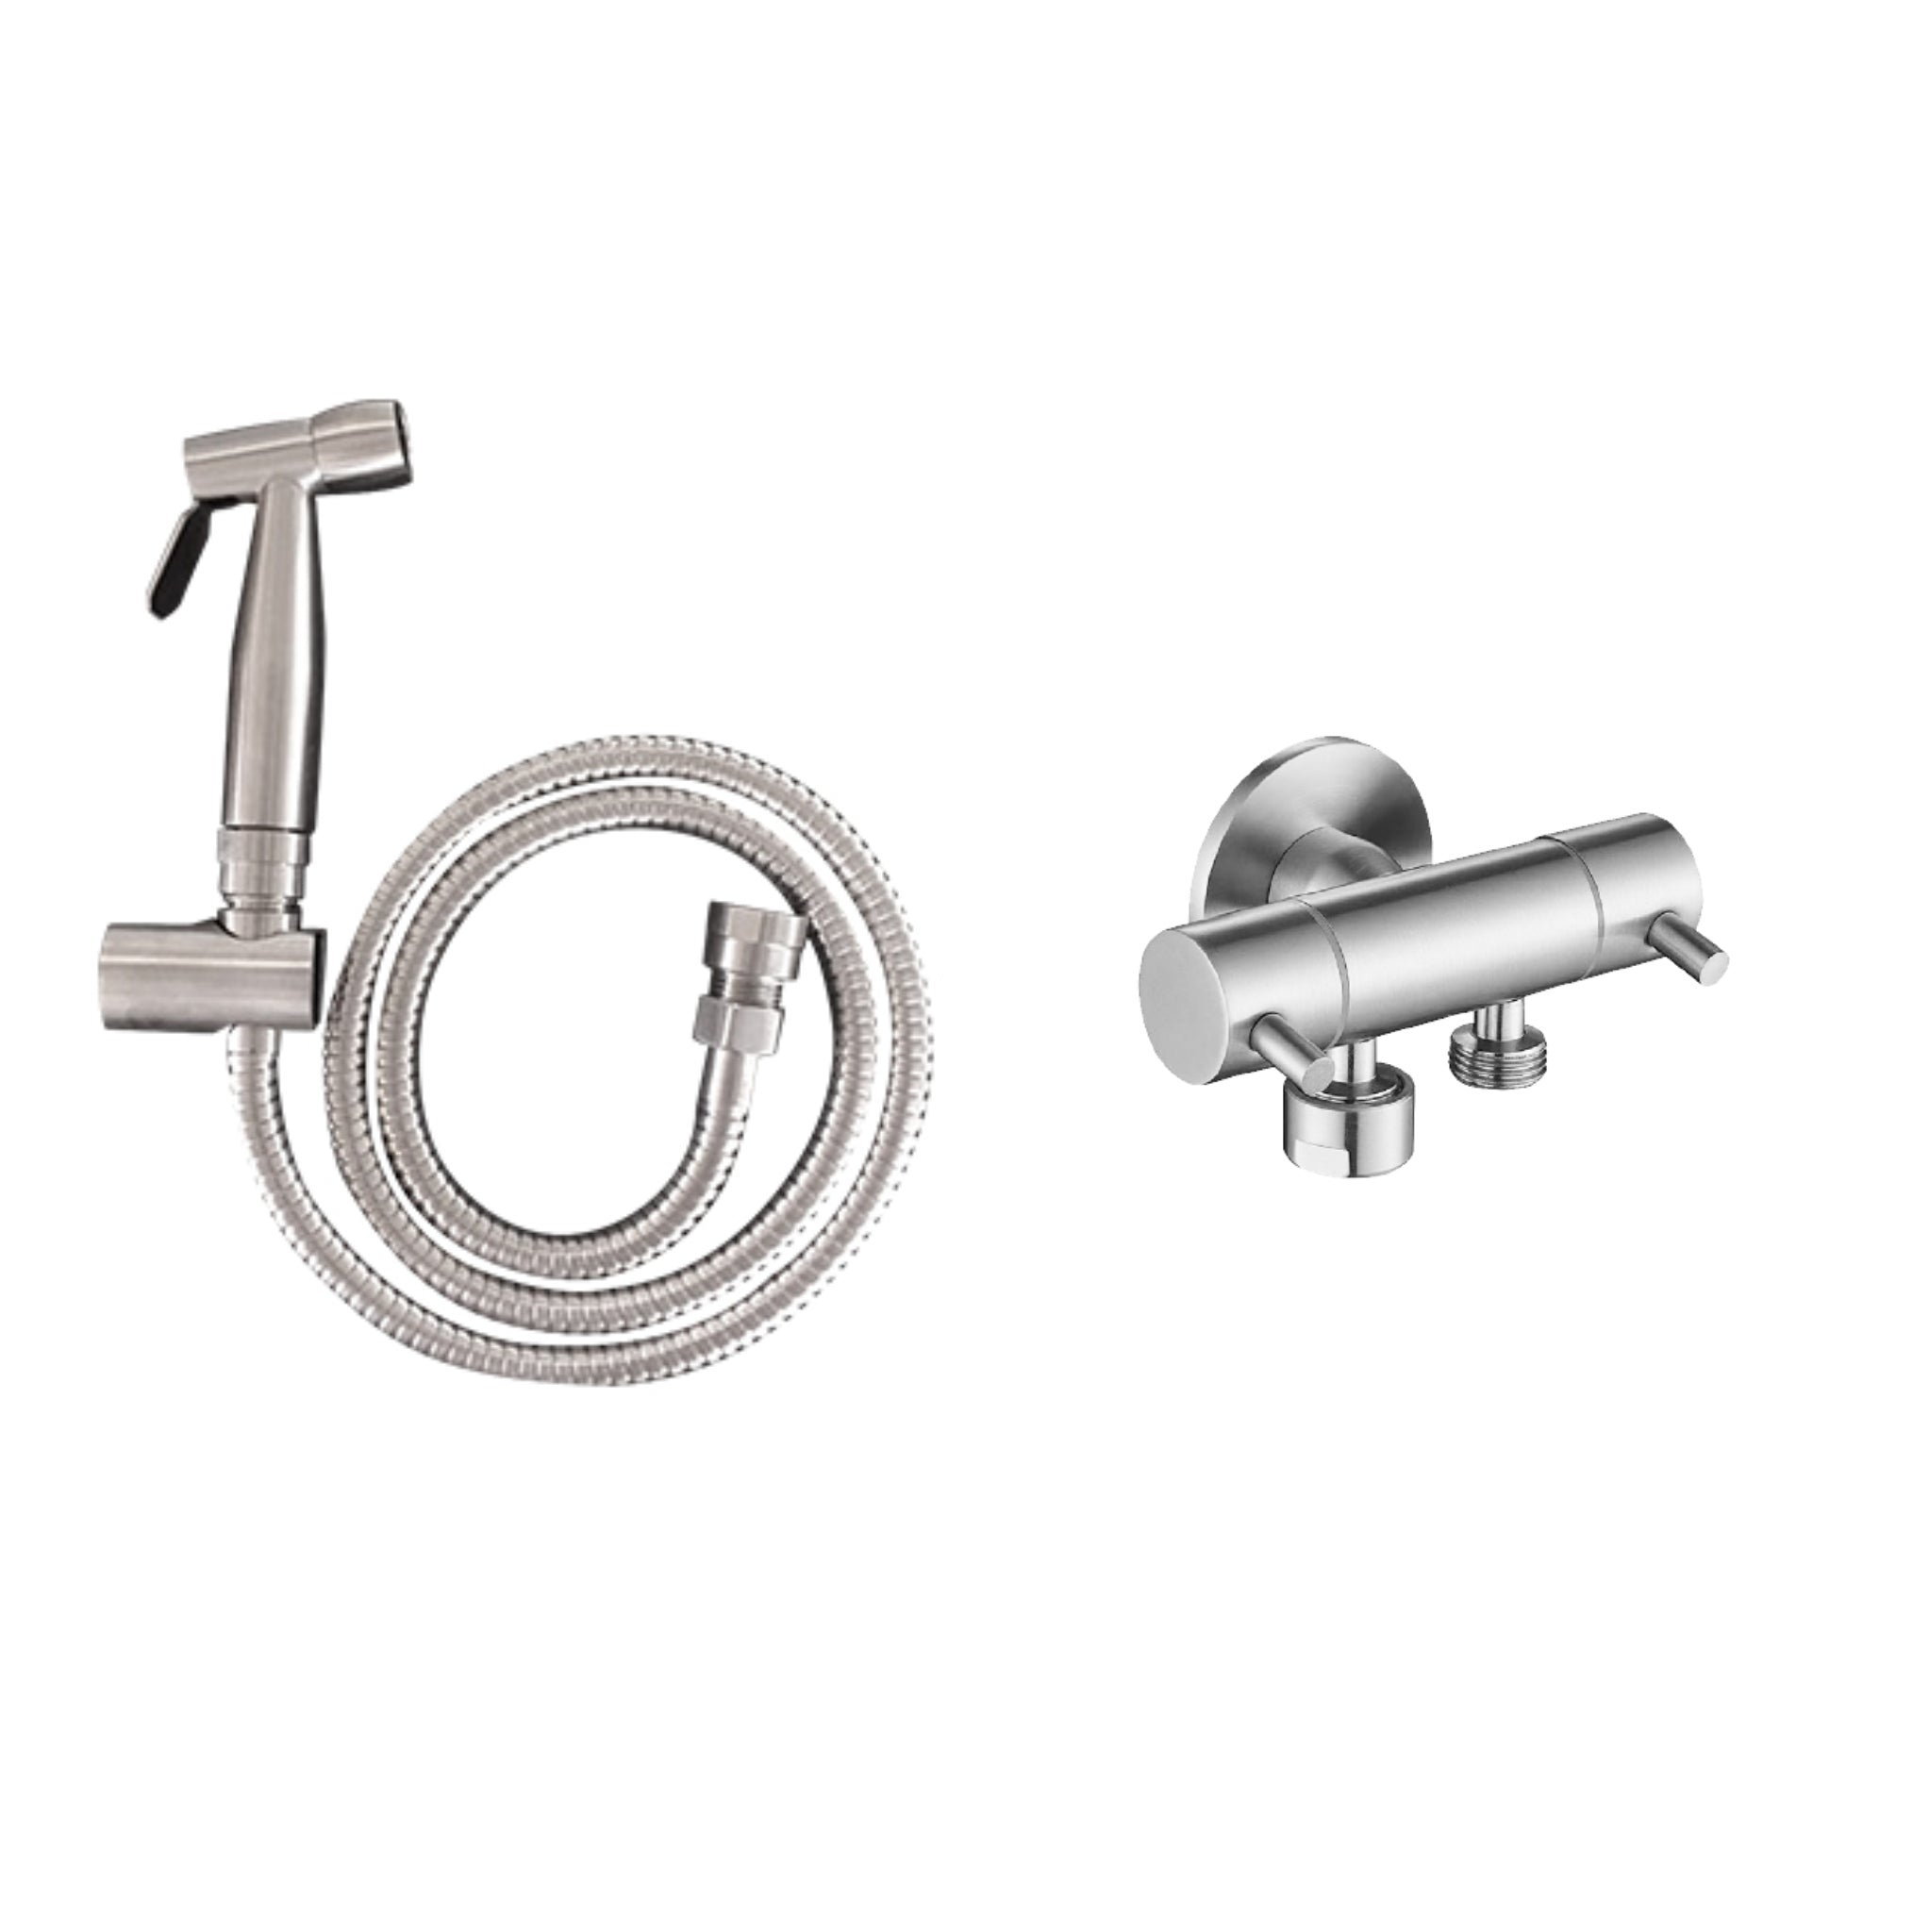 LINKWARE TRIGGER SPRAY WITH REINFORCED HOSE & DUAL MINI CISTERN COCK STAINLESS STEEL 1200MM